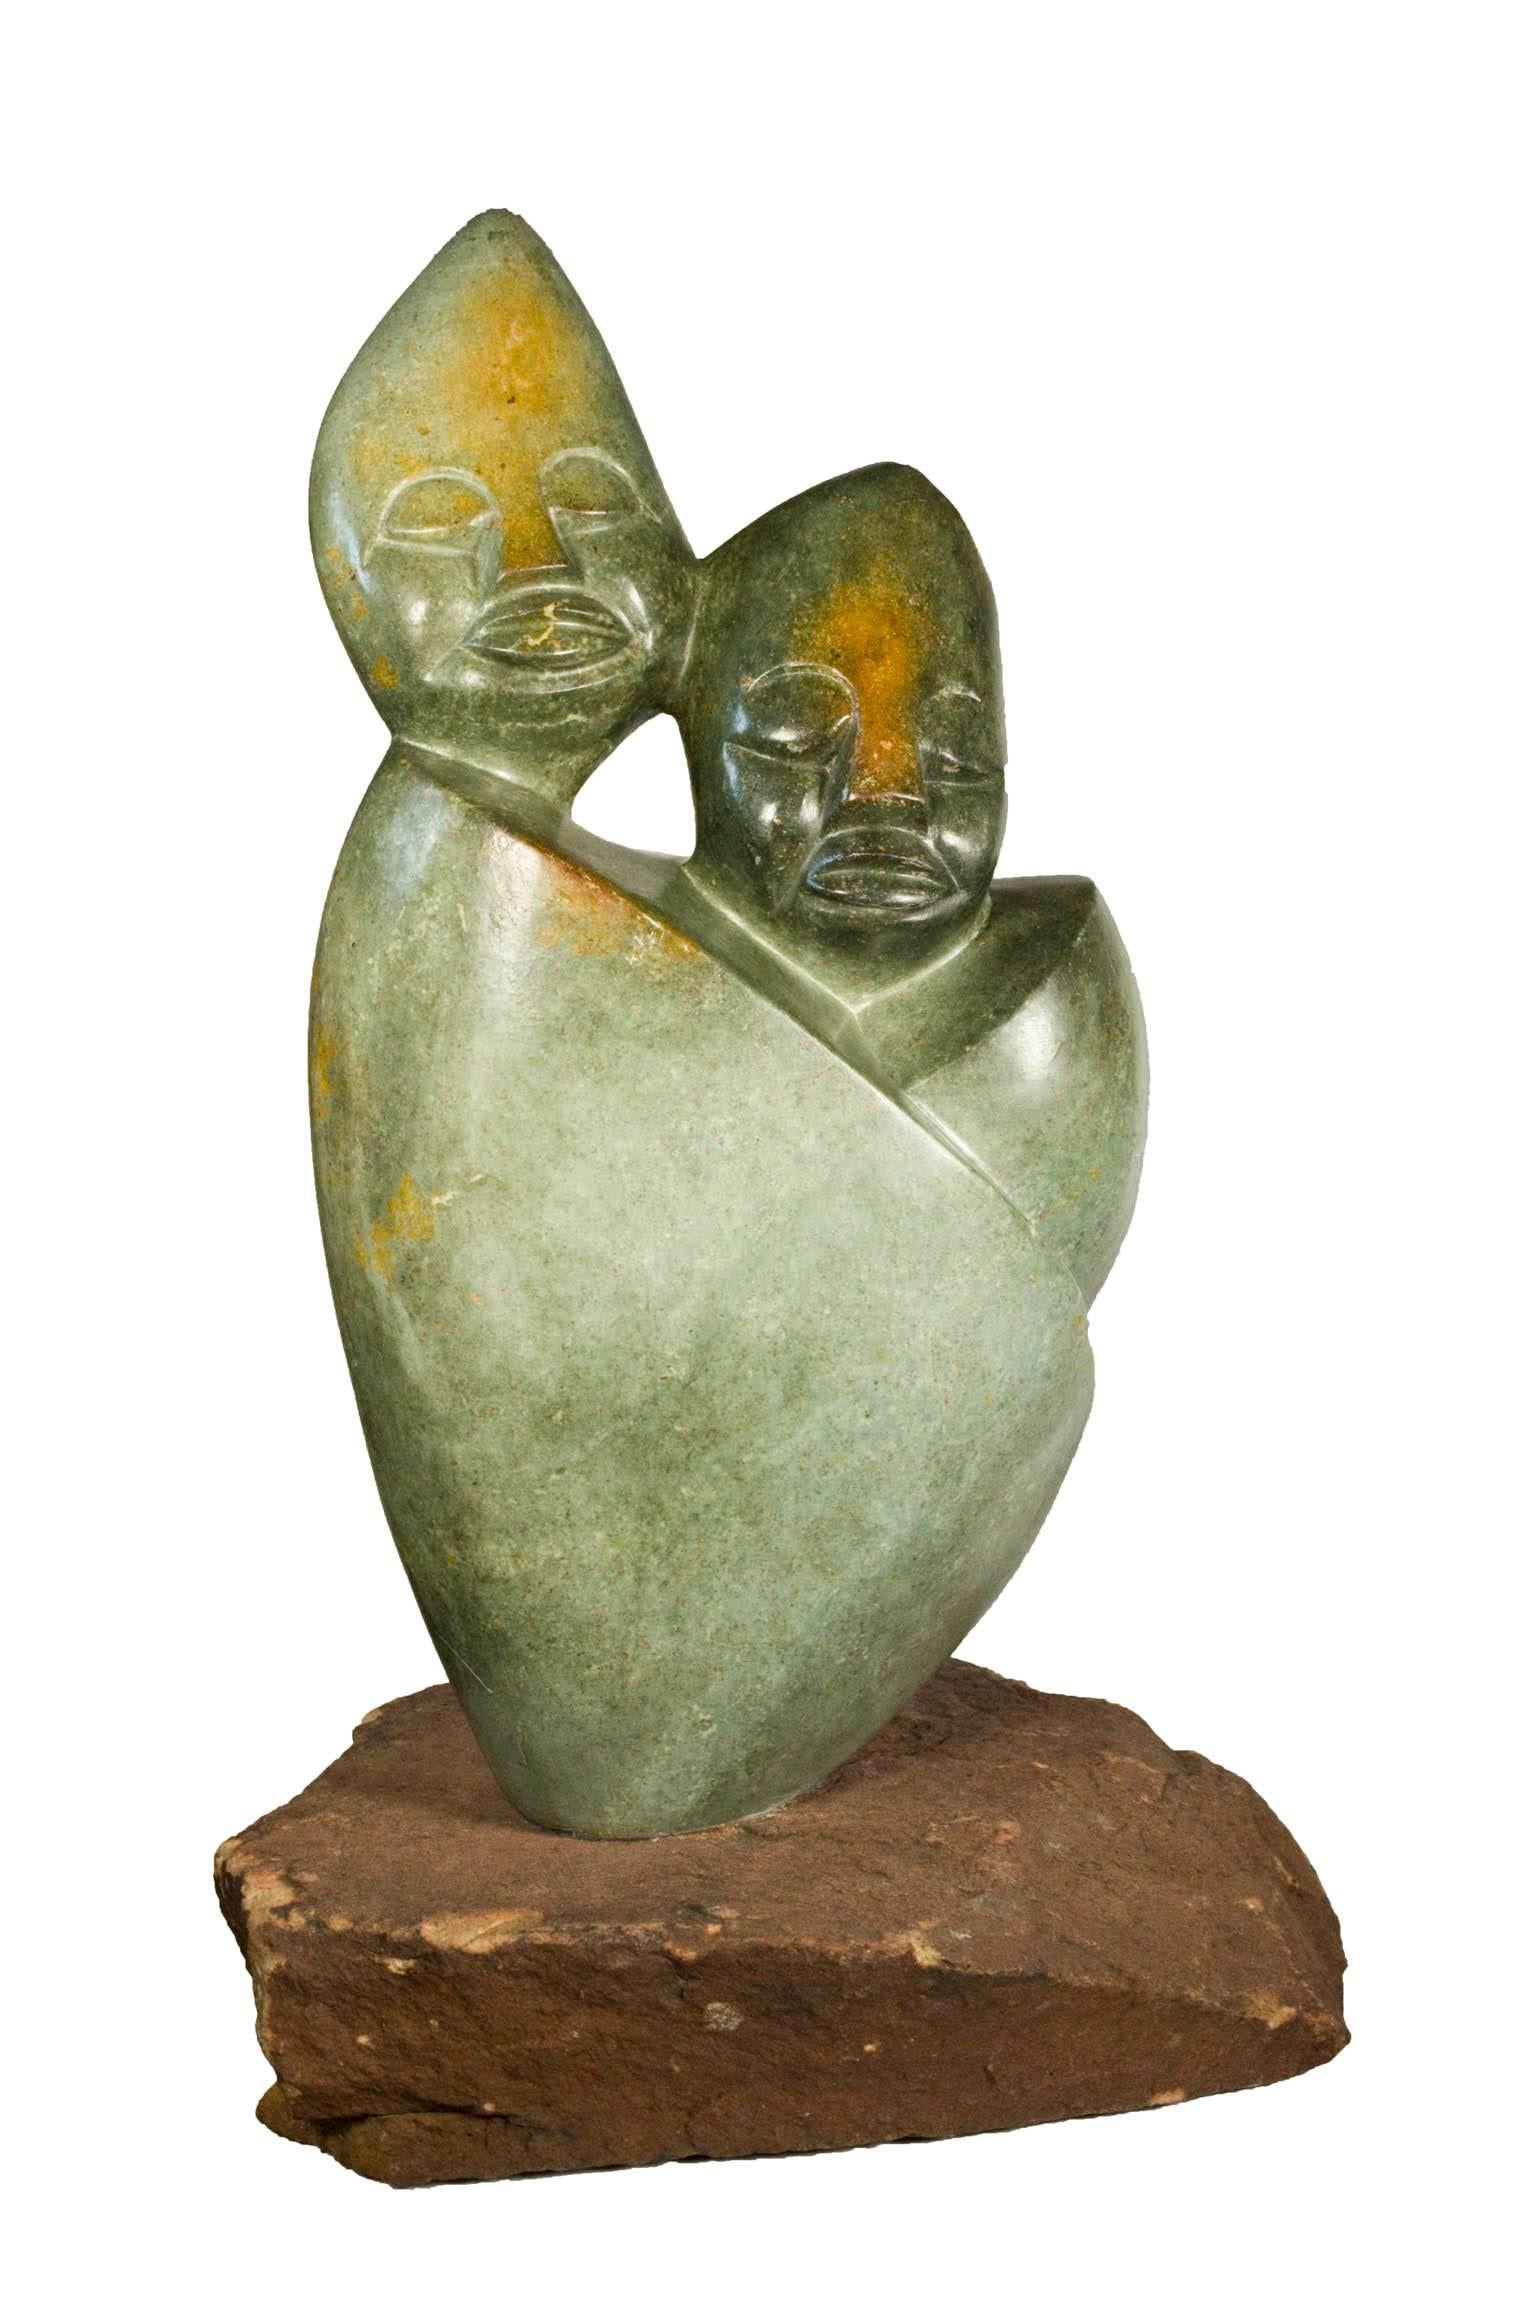 "Together Forever" is an opal sculpture created by Shona artists Tendai Marowa and Stanley Chideu. It depicts two figures permanently embraced with calm expressions on their faces. 

19" x 10" x 5 1/2" sculpture

Shona artists and crafts people have